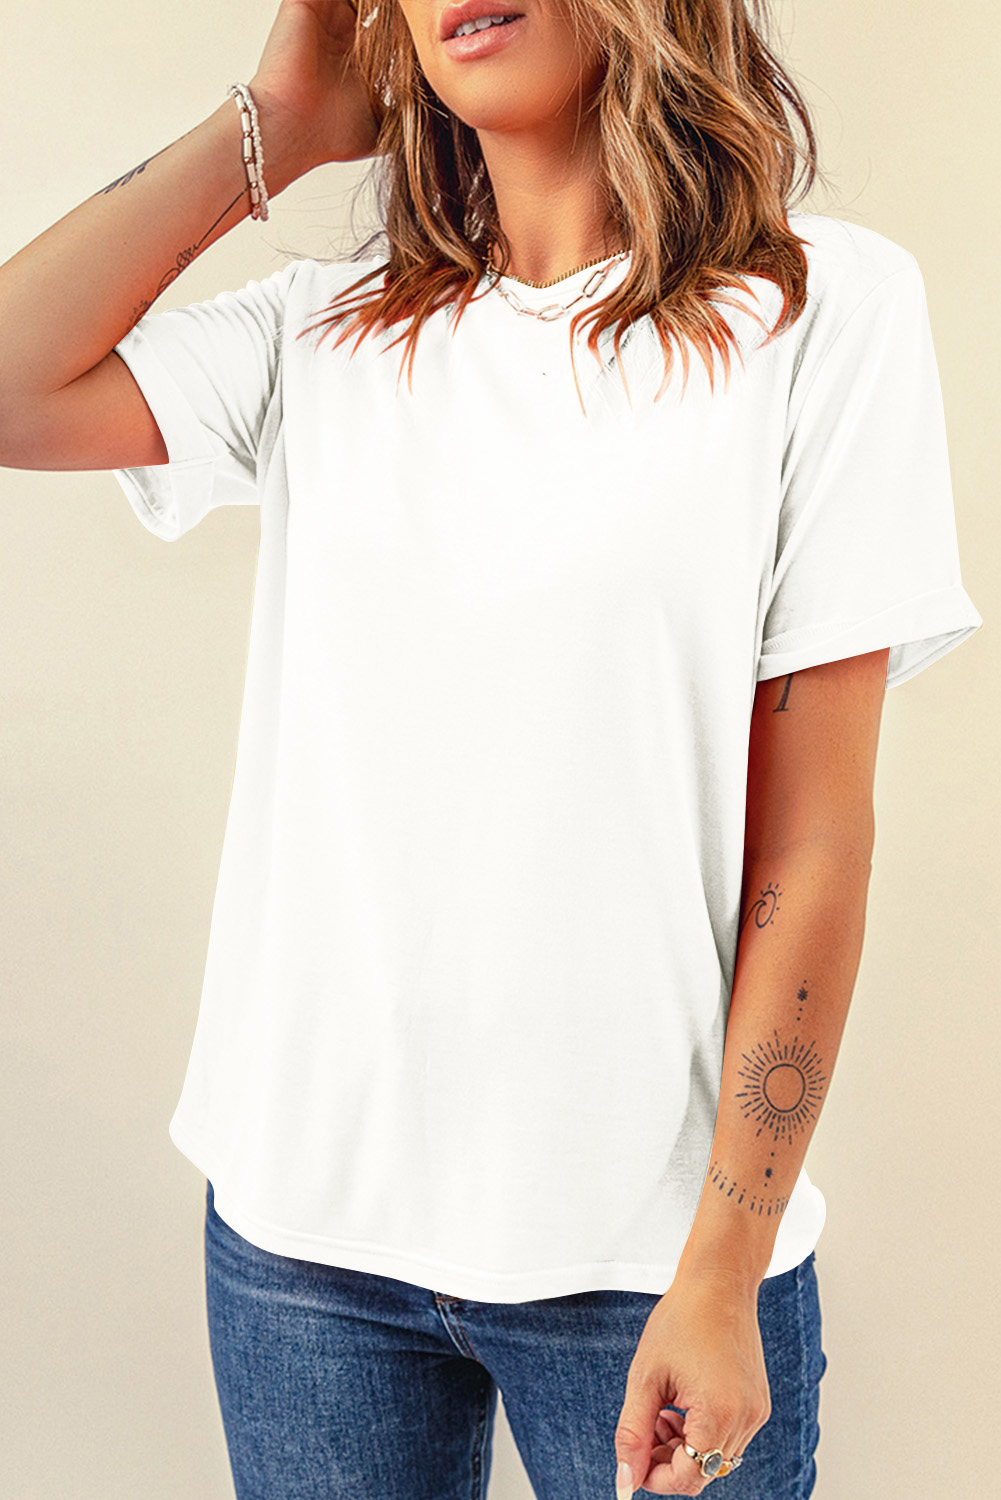 Shewin Wholesale Casual White Solid Color Basic Crew Neck Plain Tee